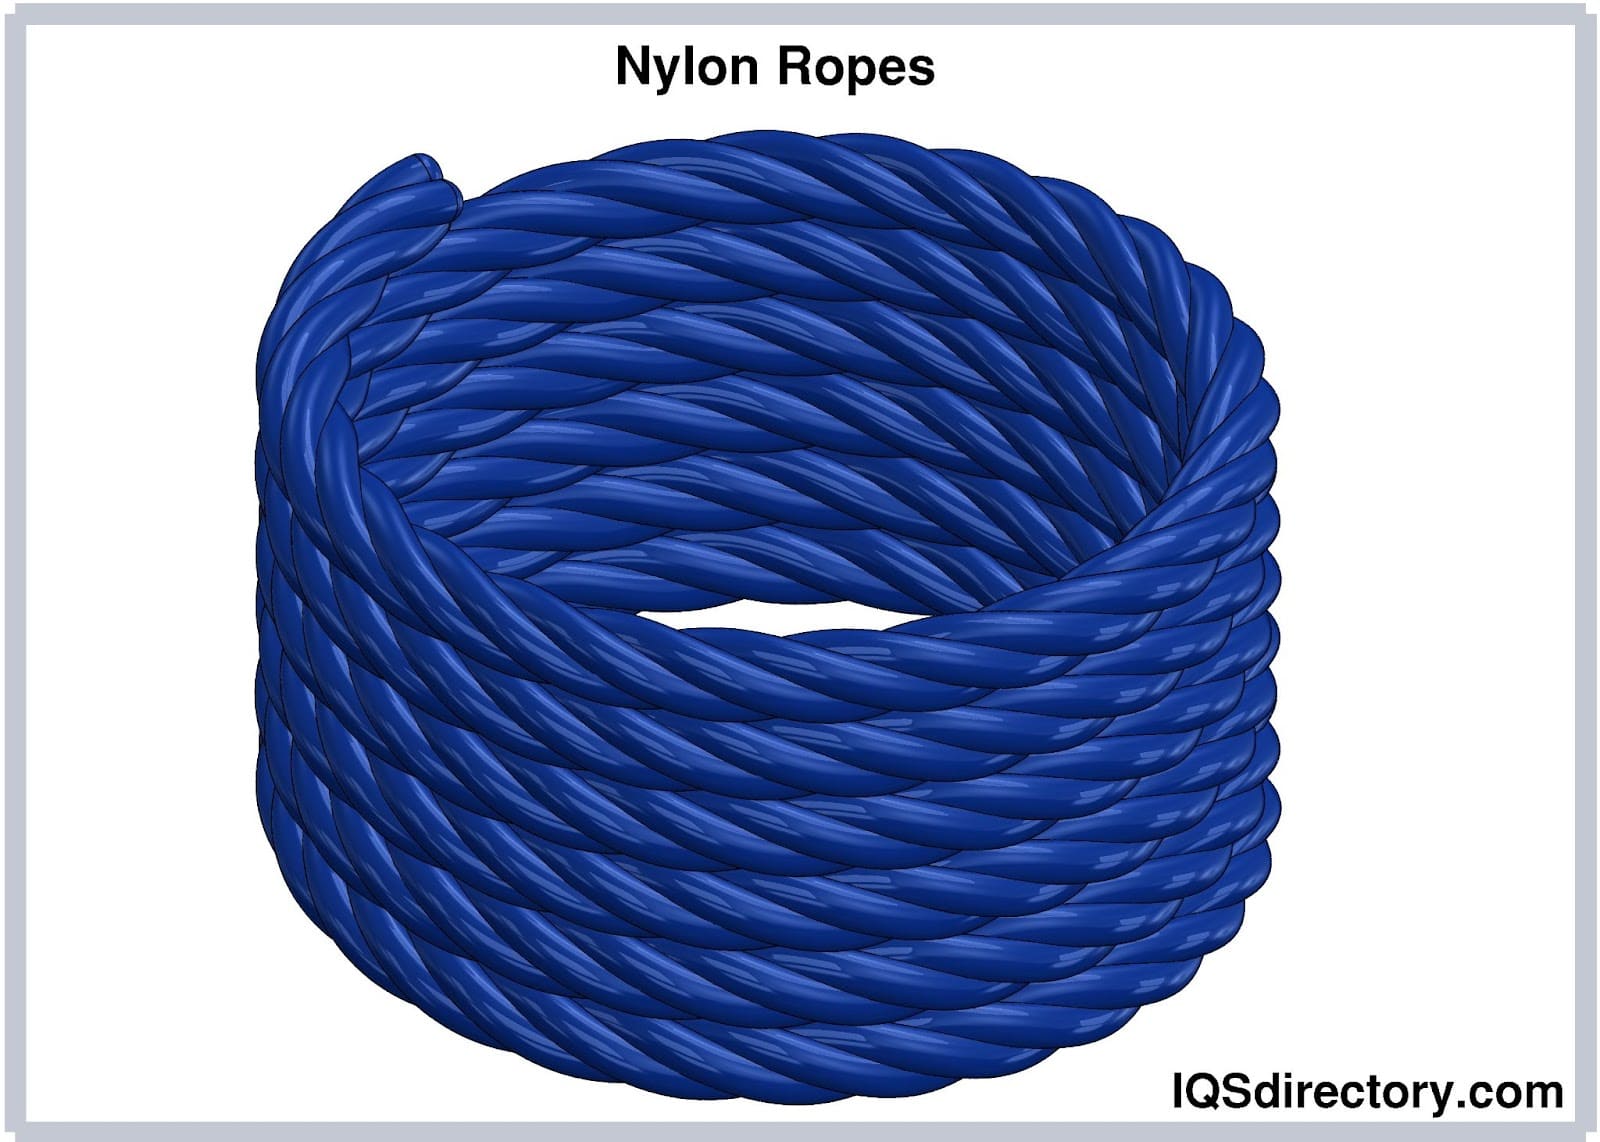 Non Stretch Rope Or Low Stretch: What Do I Need? - Quality Nylon Rope